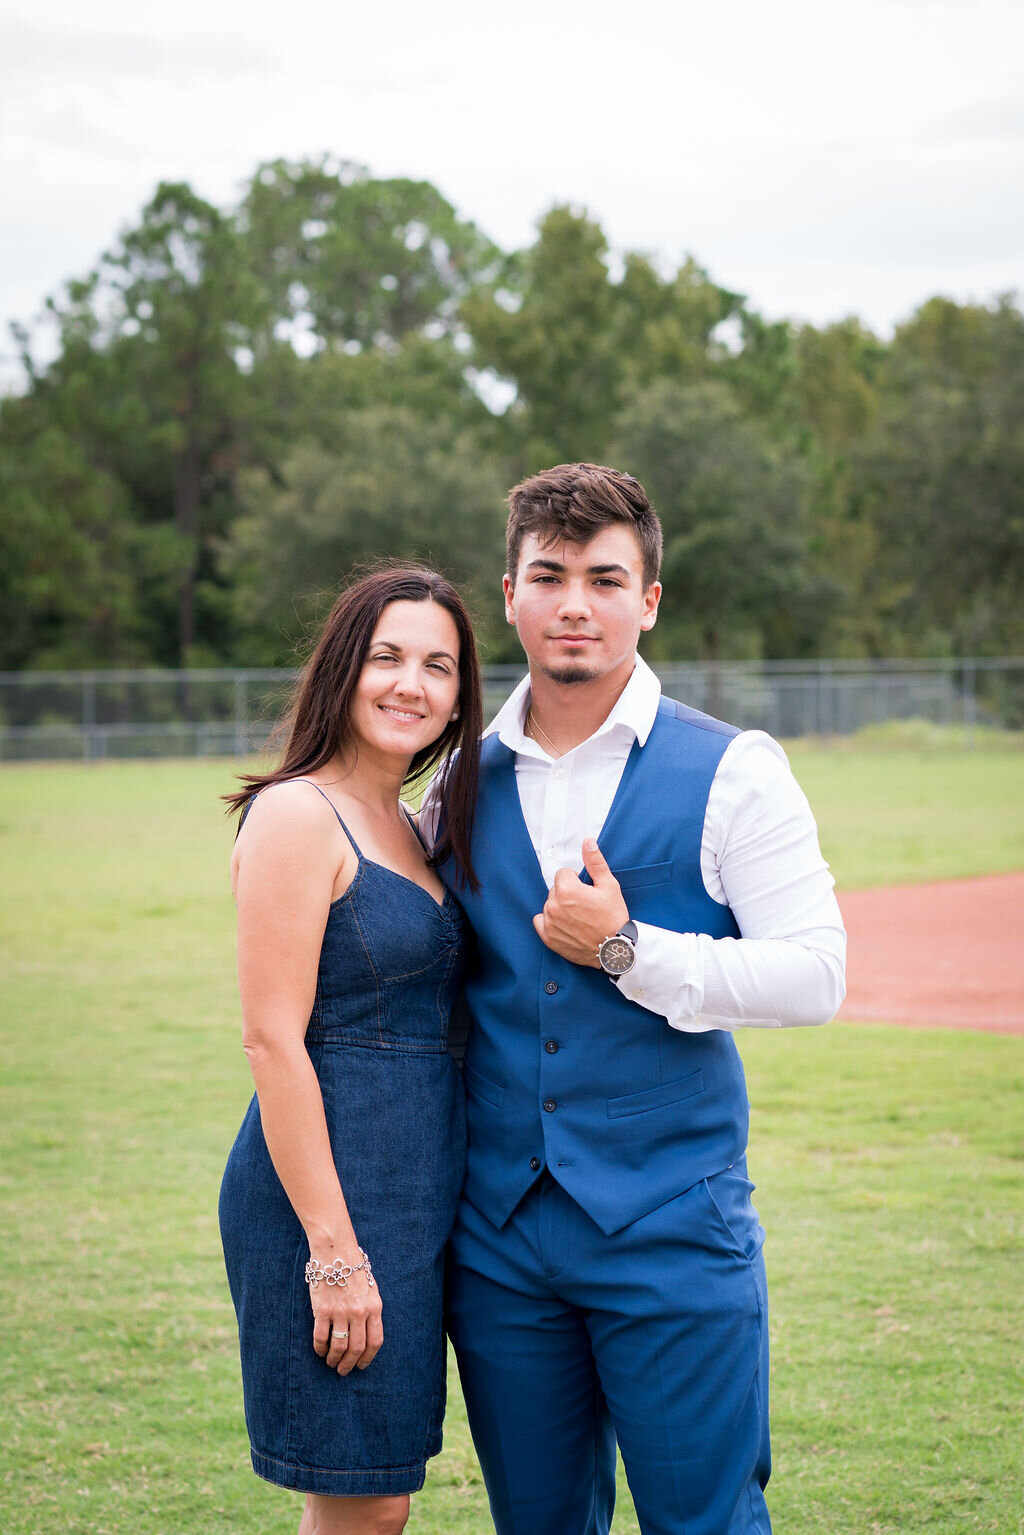 mom-and-son-senior-pictures, family-pictures, family-photography-session, family-session, mother-and-son-photography, high-school-senior-pictures